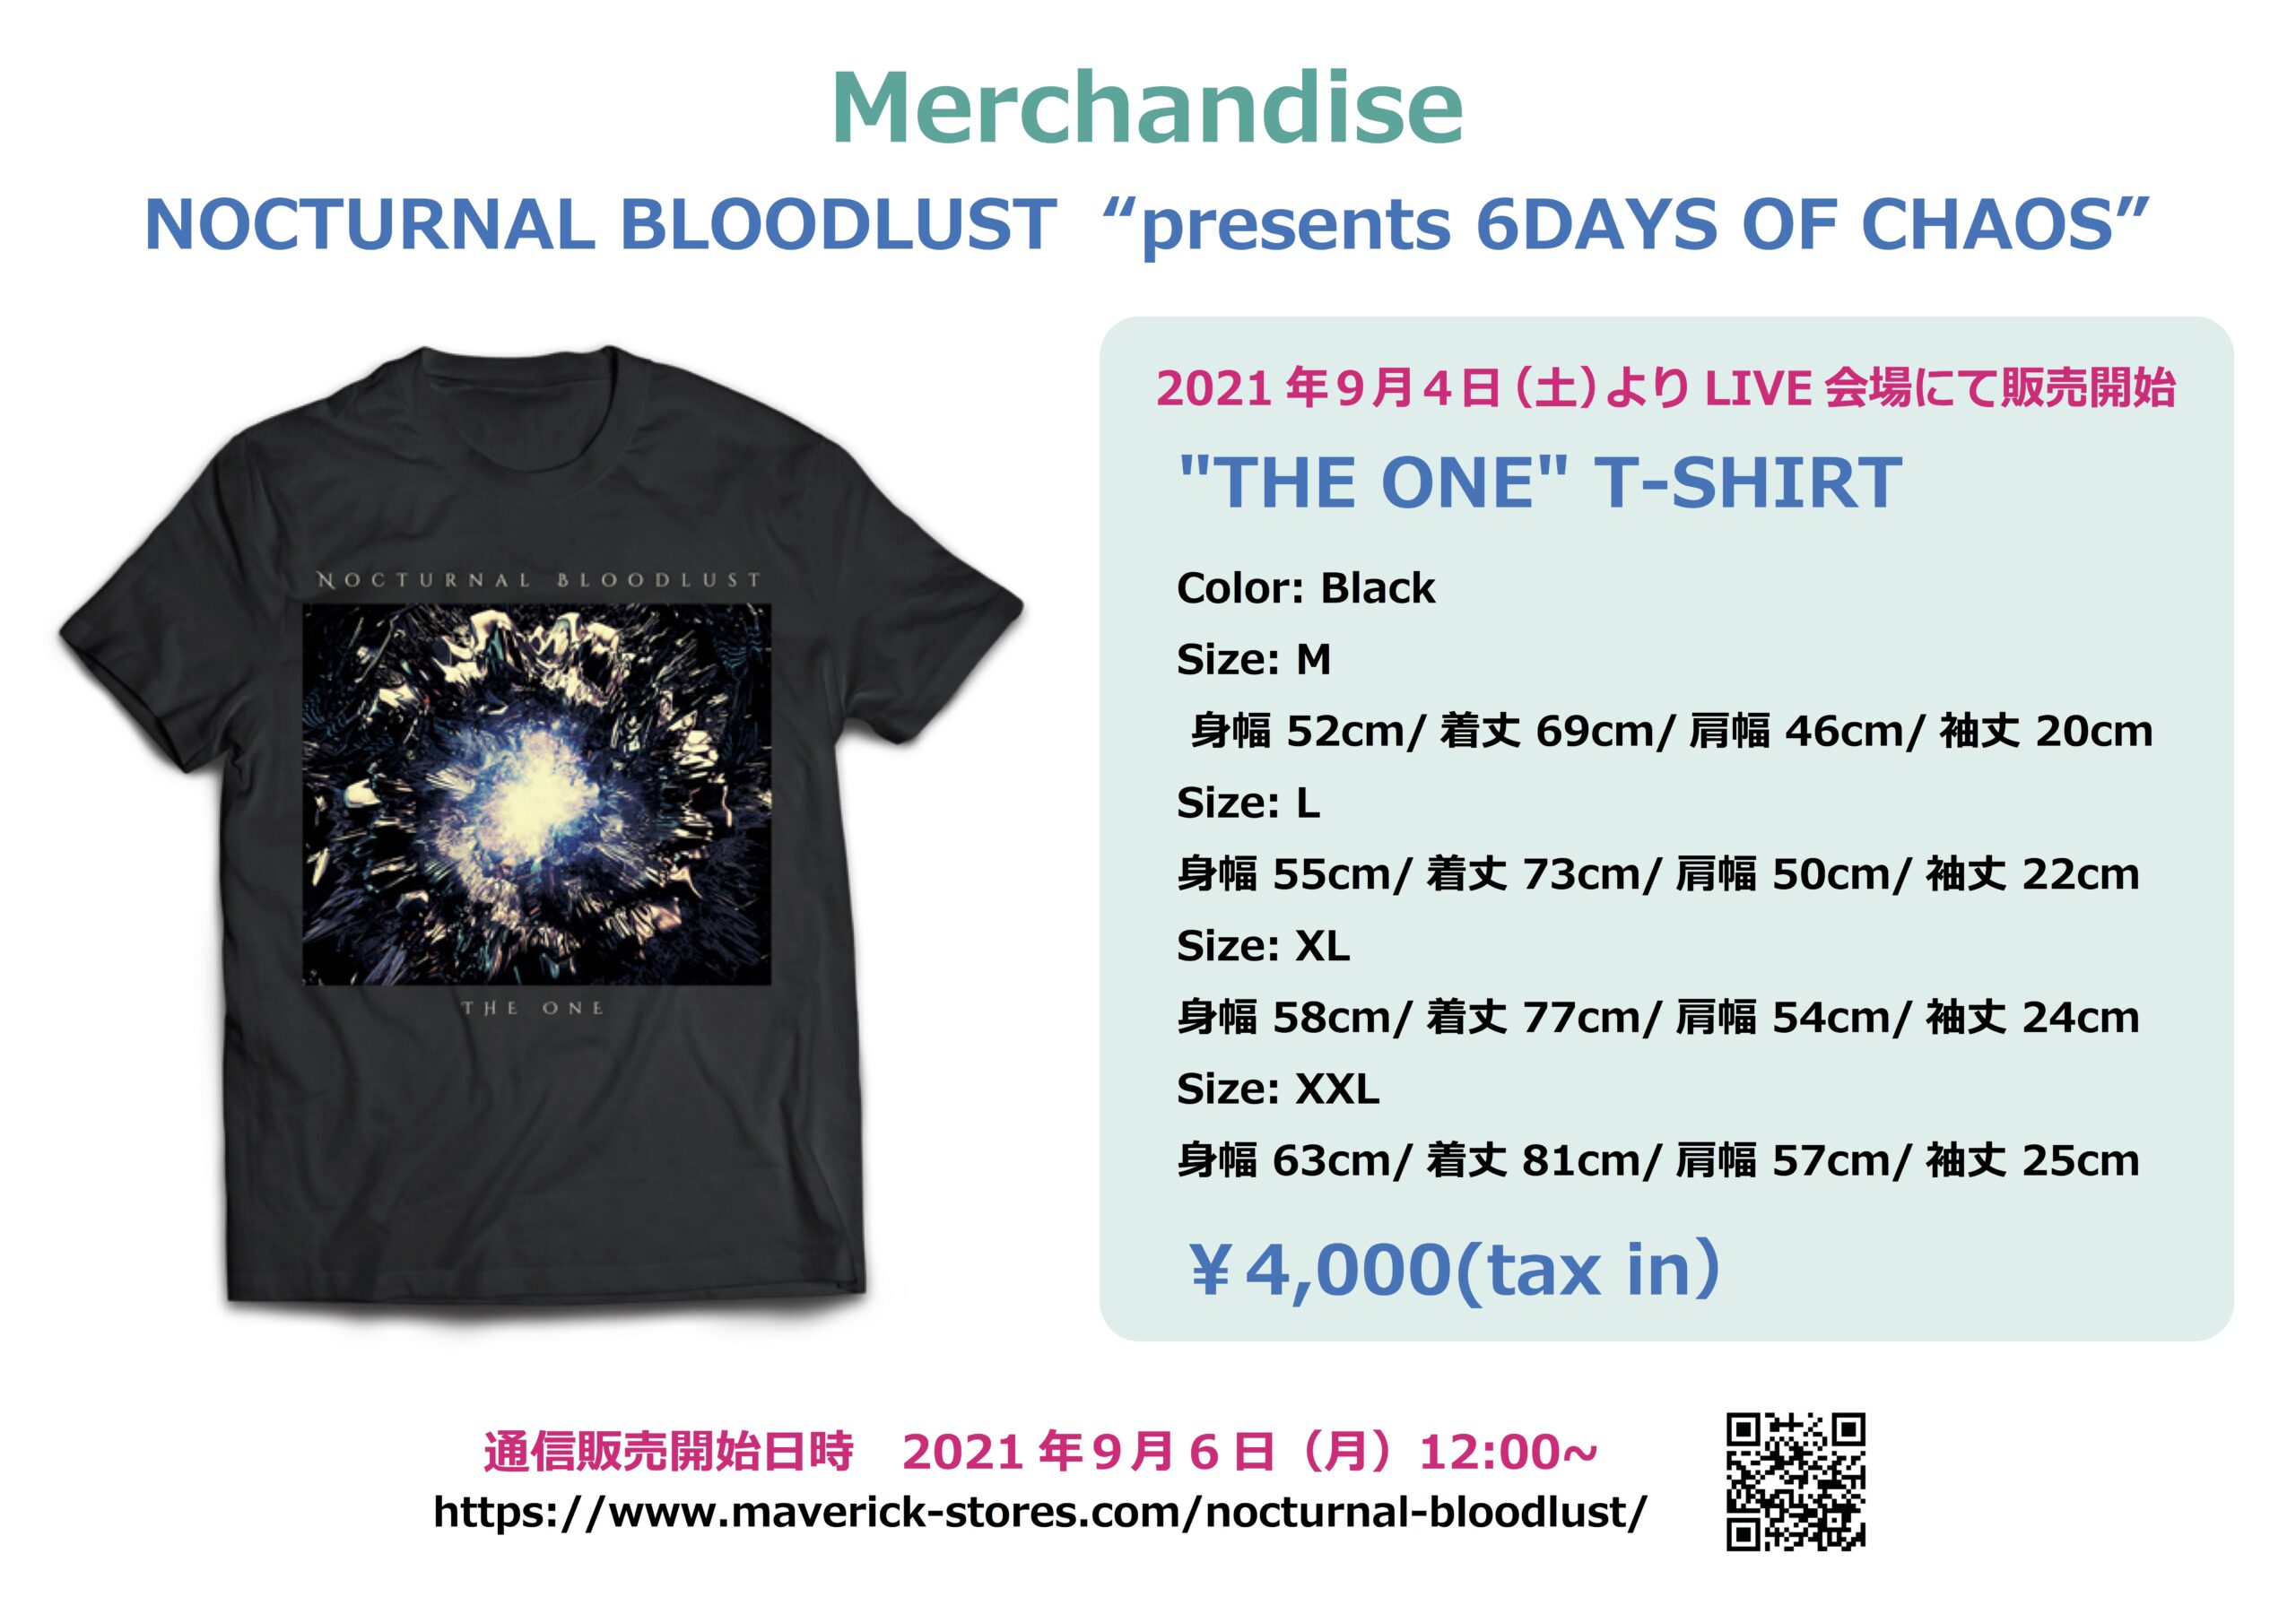 NOCTURNAL BLOODLUST ”presents“ 6DAYS OF CHAOS”グッズ販売に関するお知らせ